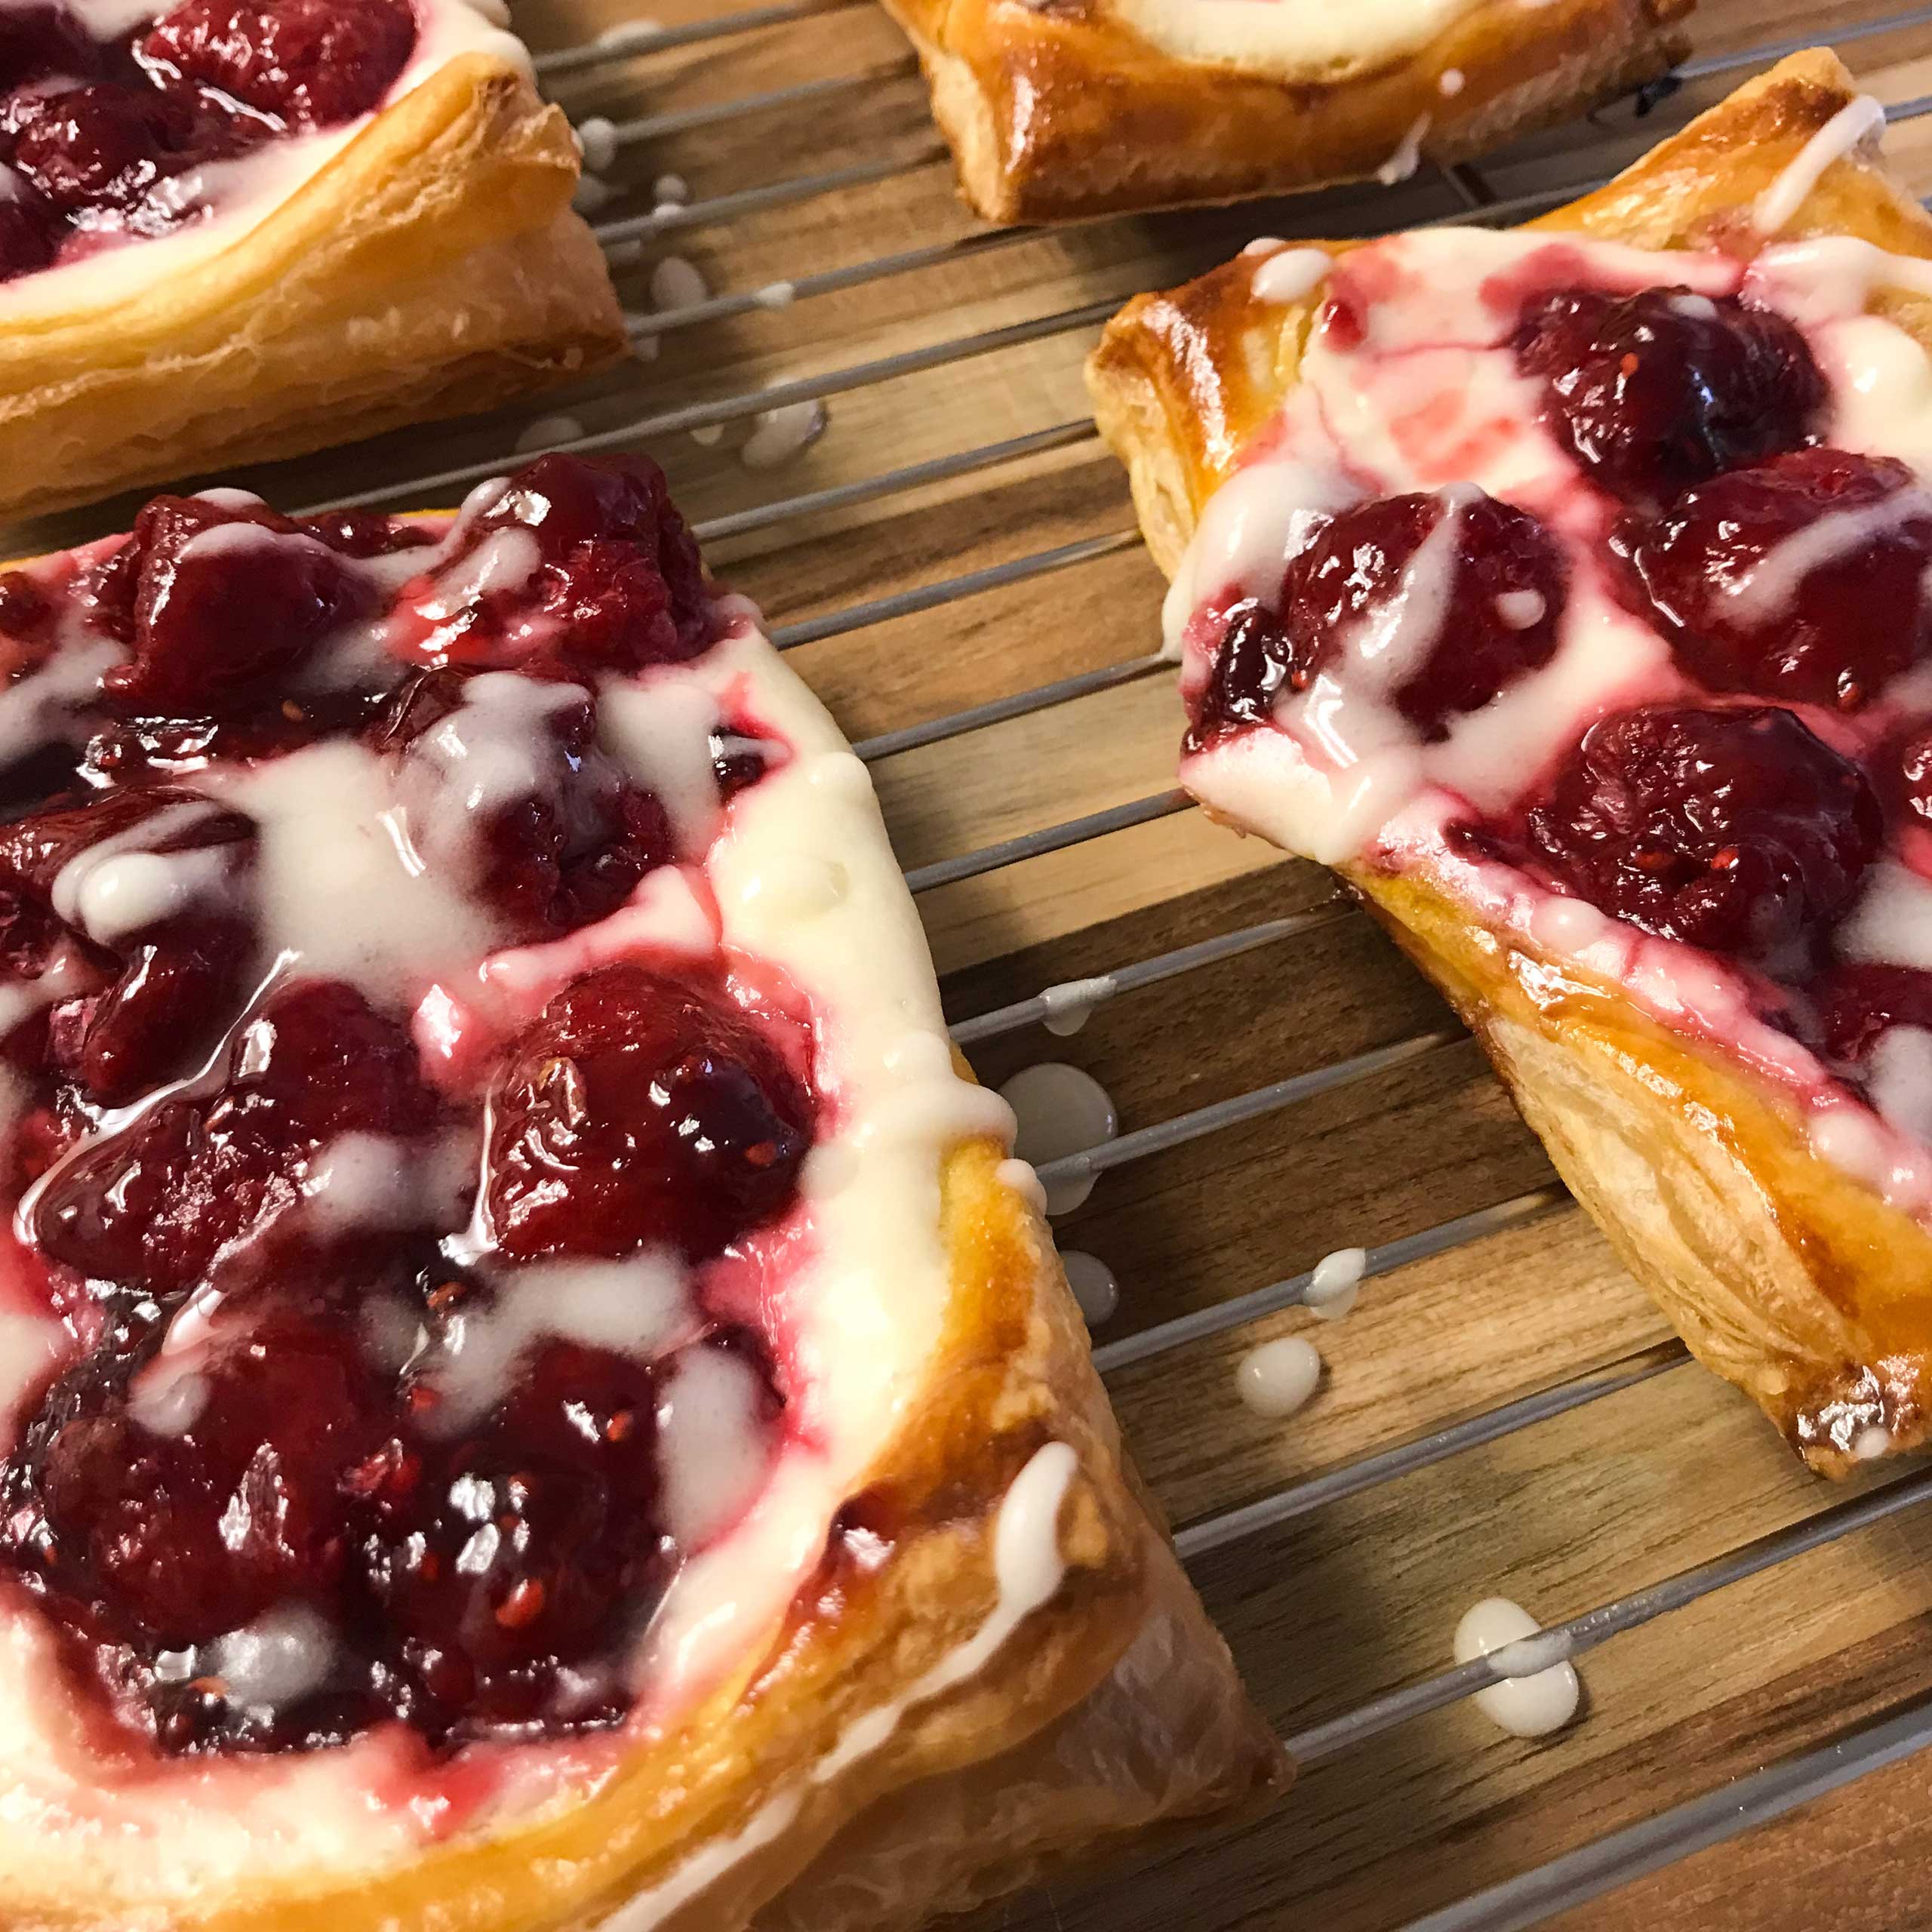 Raspberry Puff Pastry Tarts | My Curated Tastes